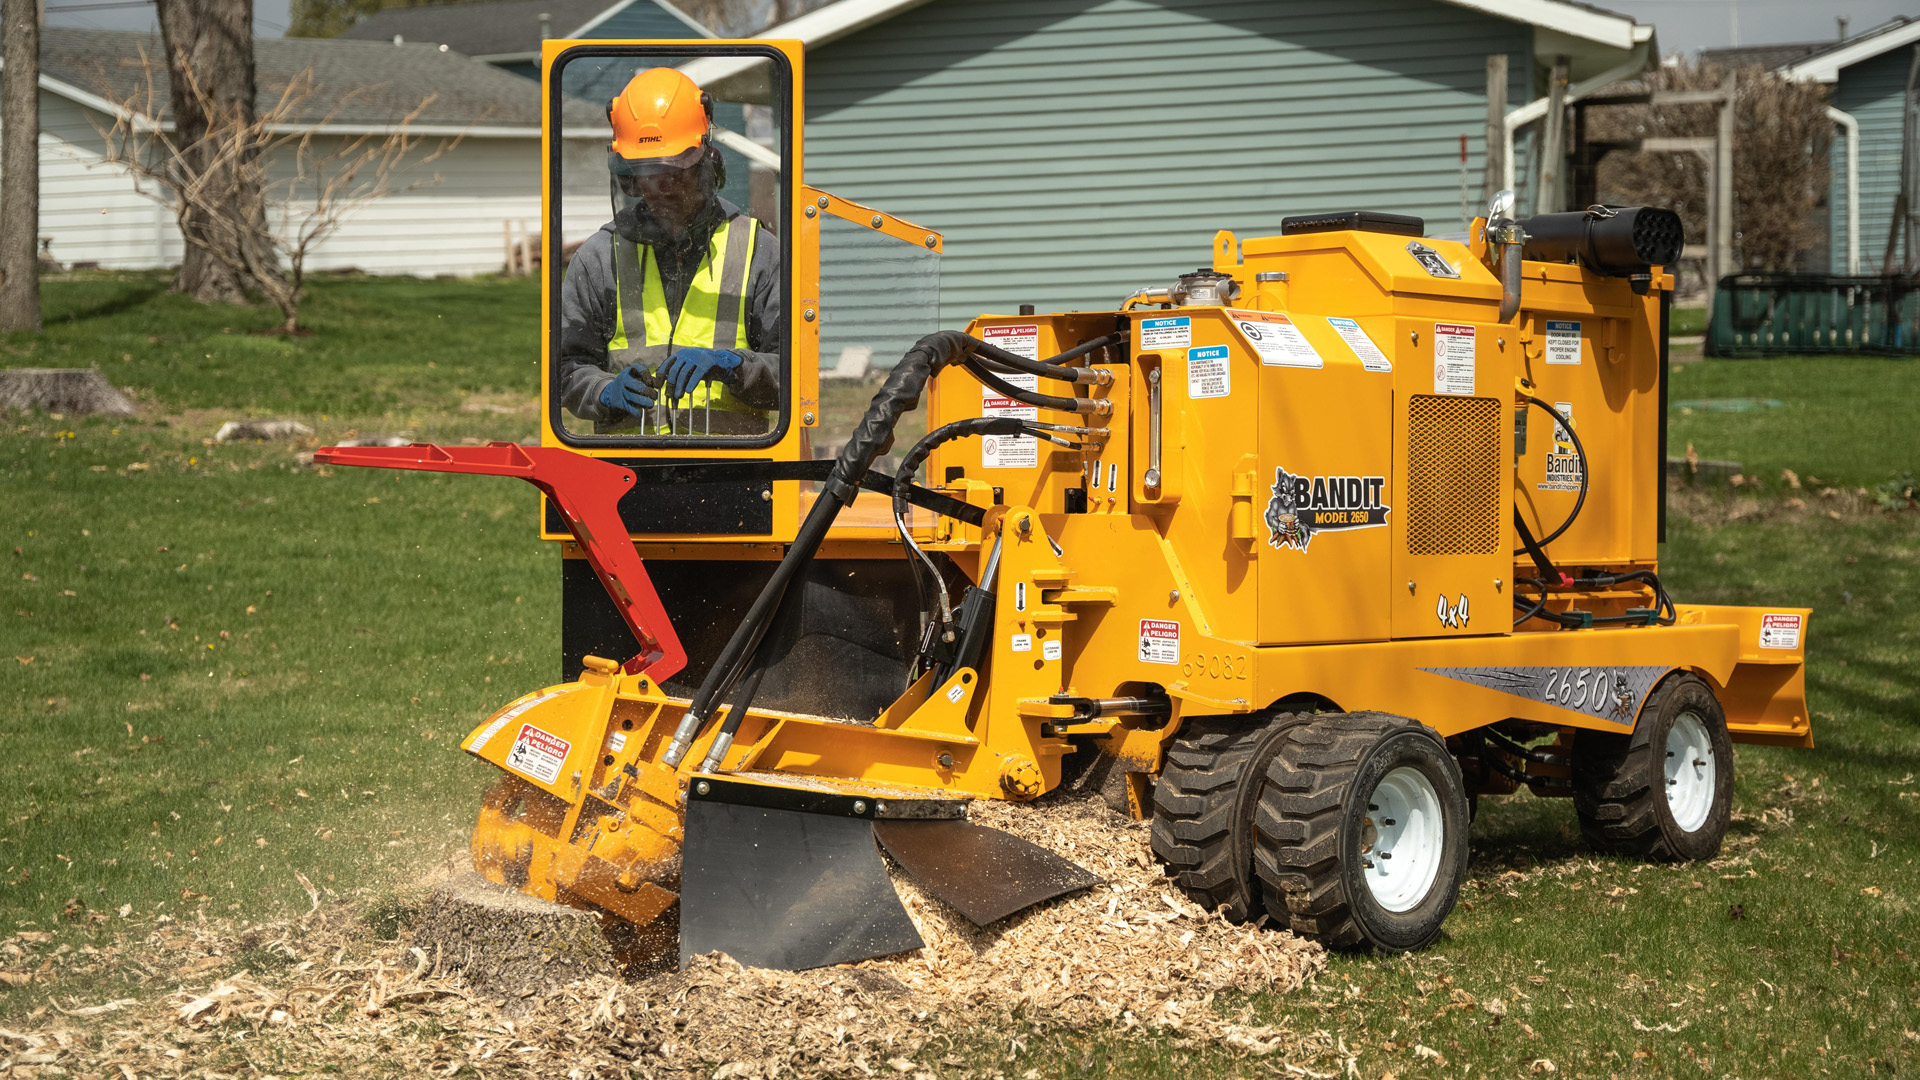 Bandit Stump Grinder 2650 from Iron Source in Delaware